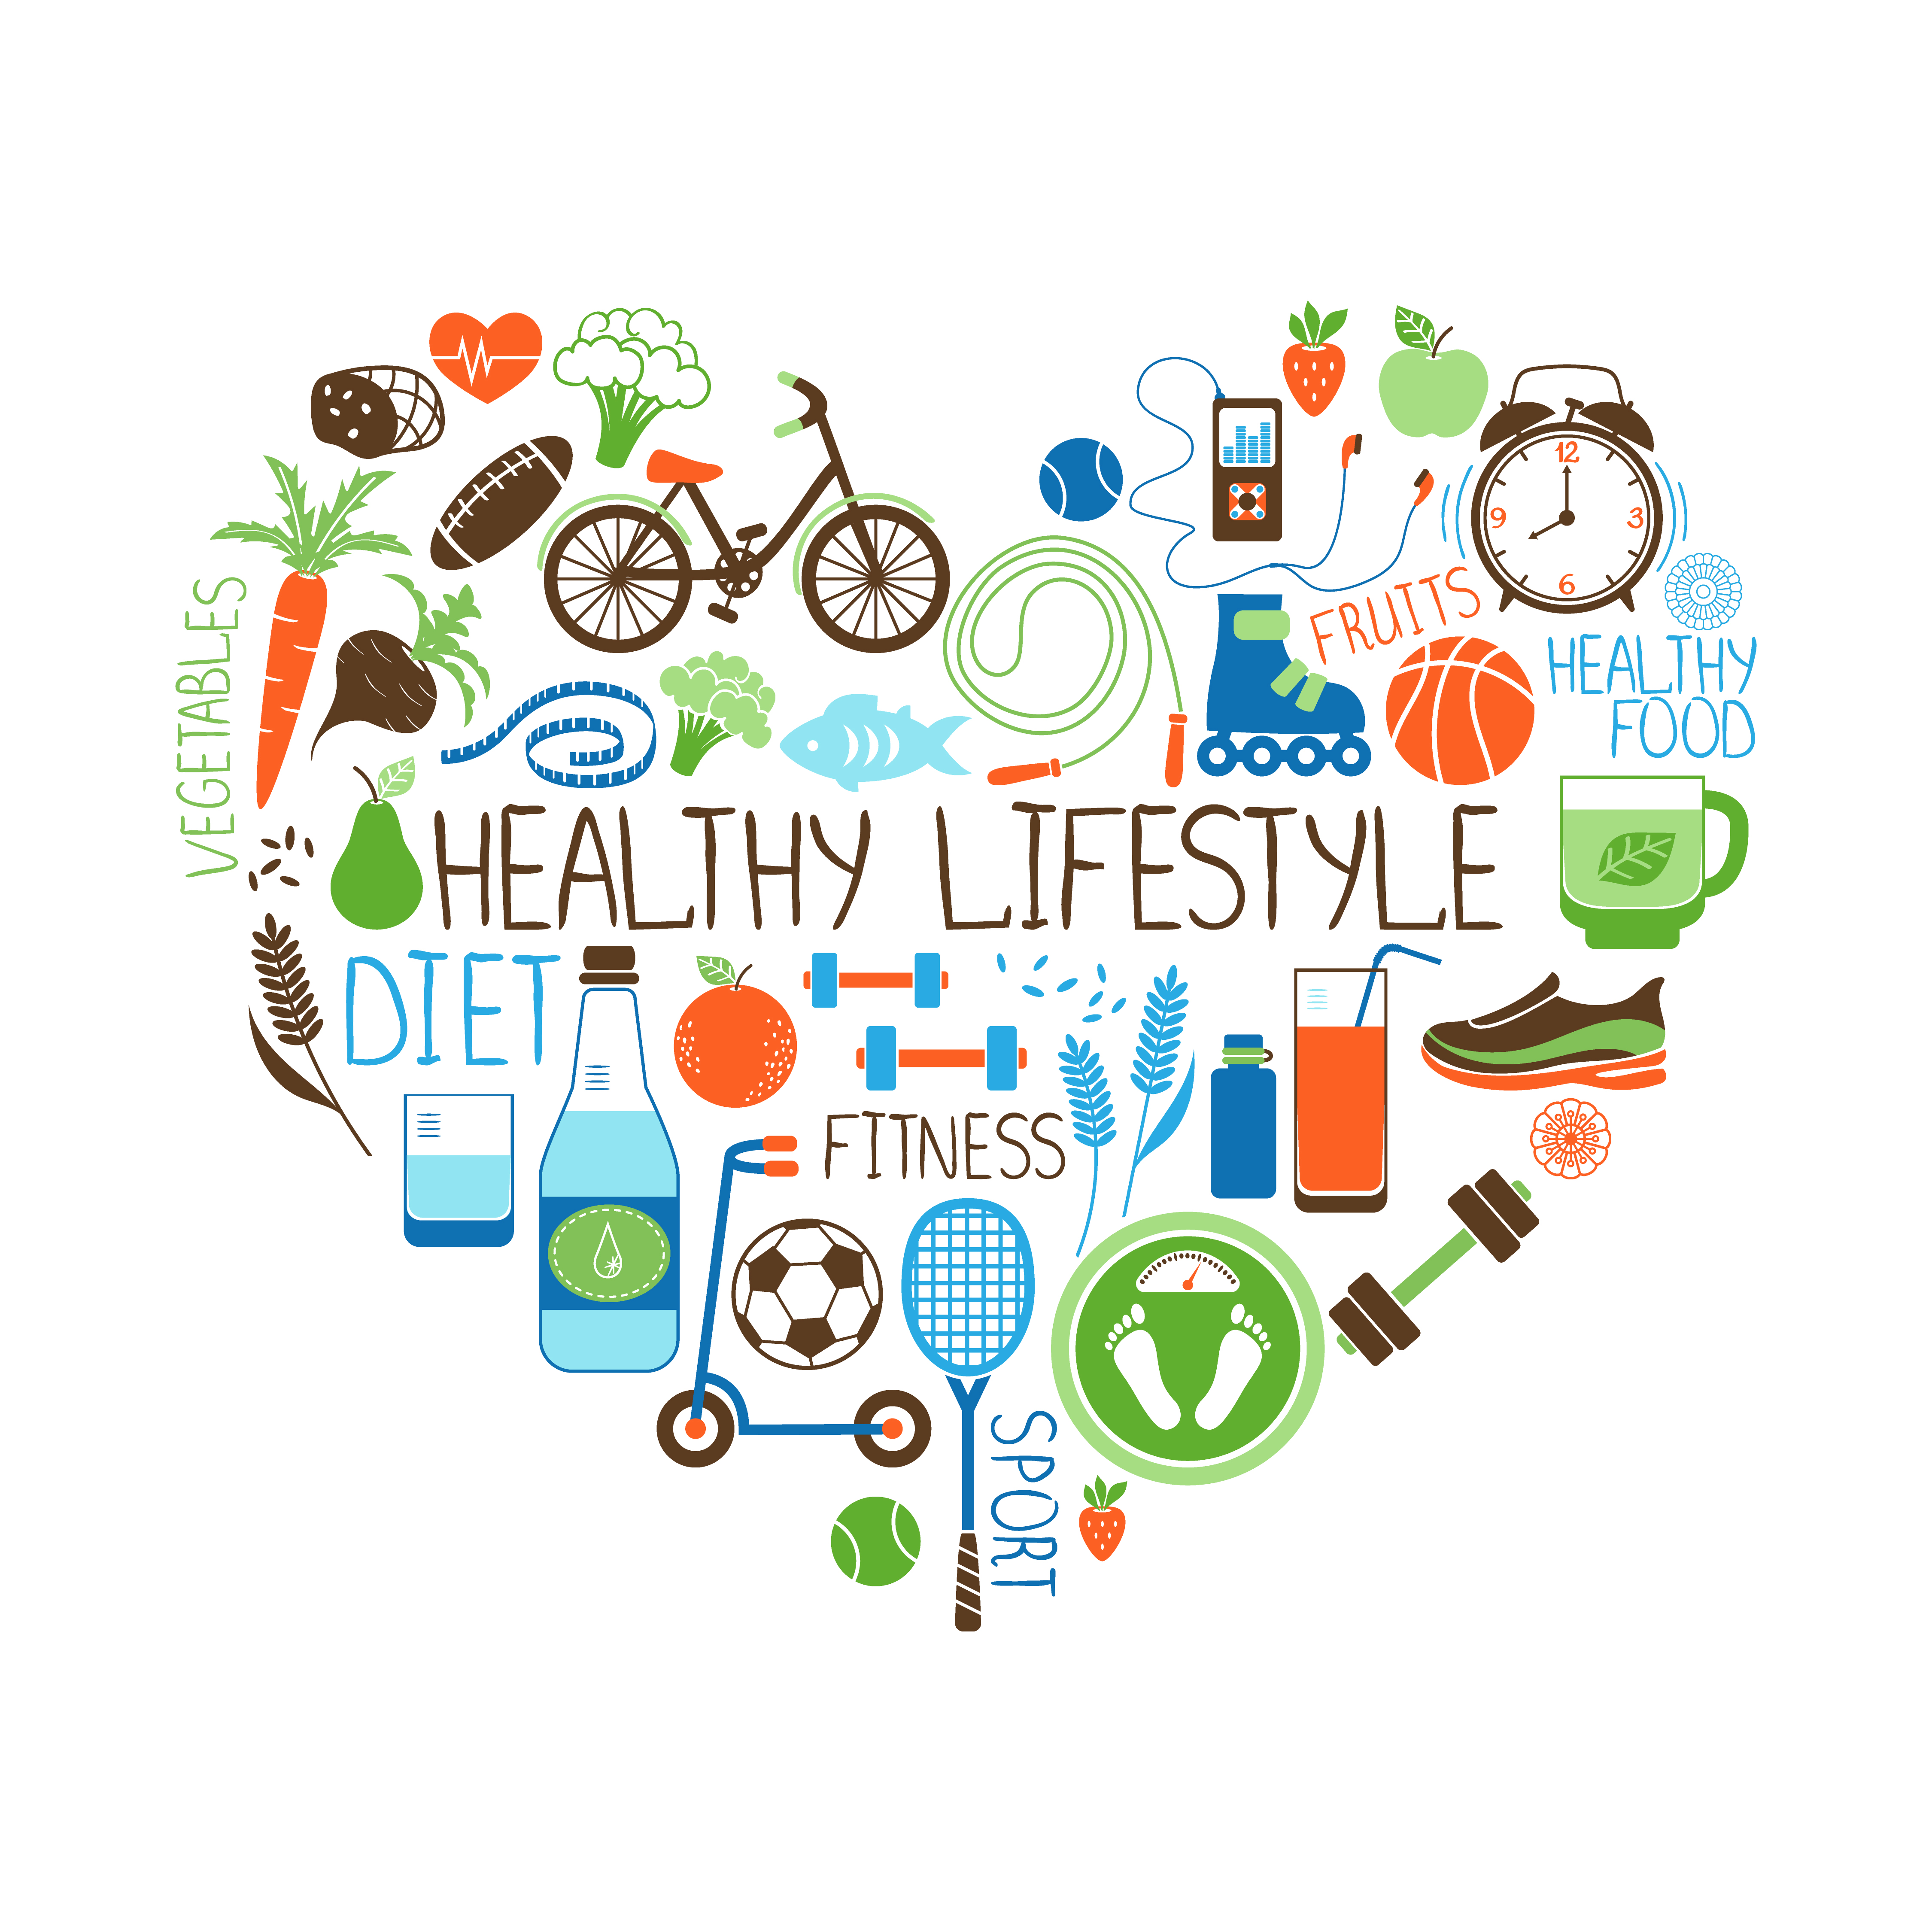 Tips to Maintaining a Healthy Lifestyle